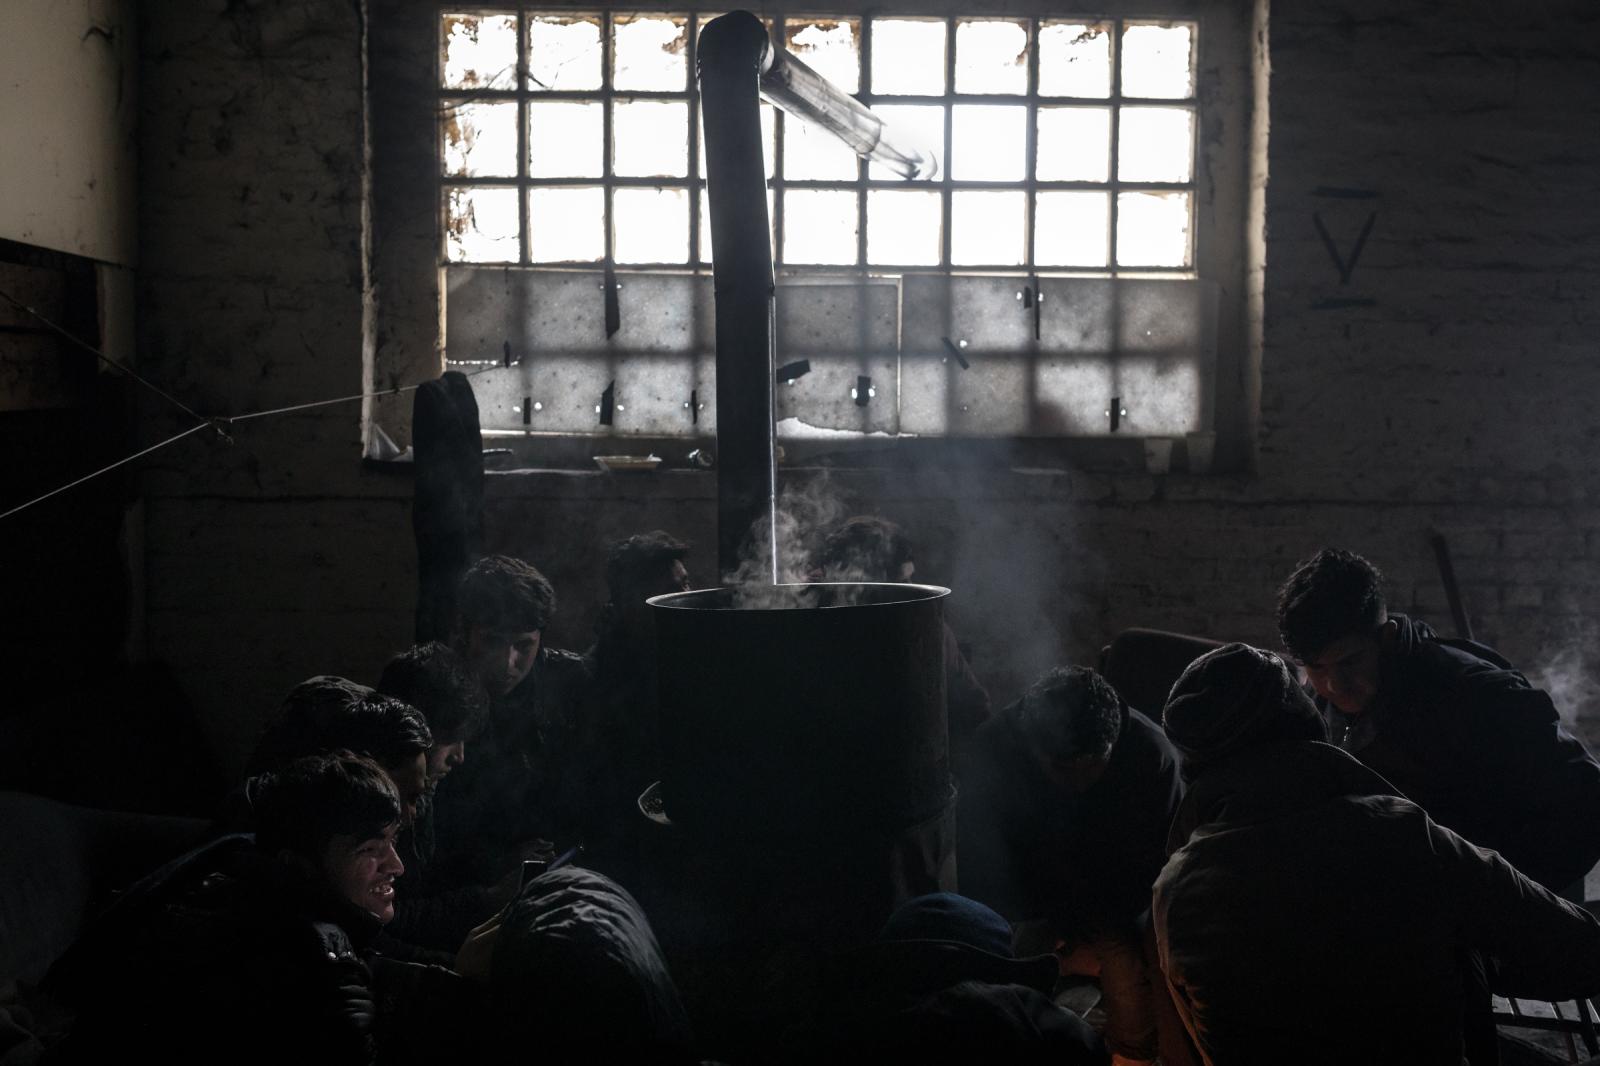 Afghan migrants trying to warm ...ward toward the central Europe.